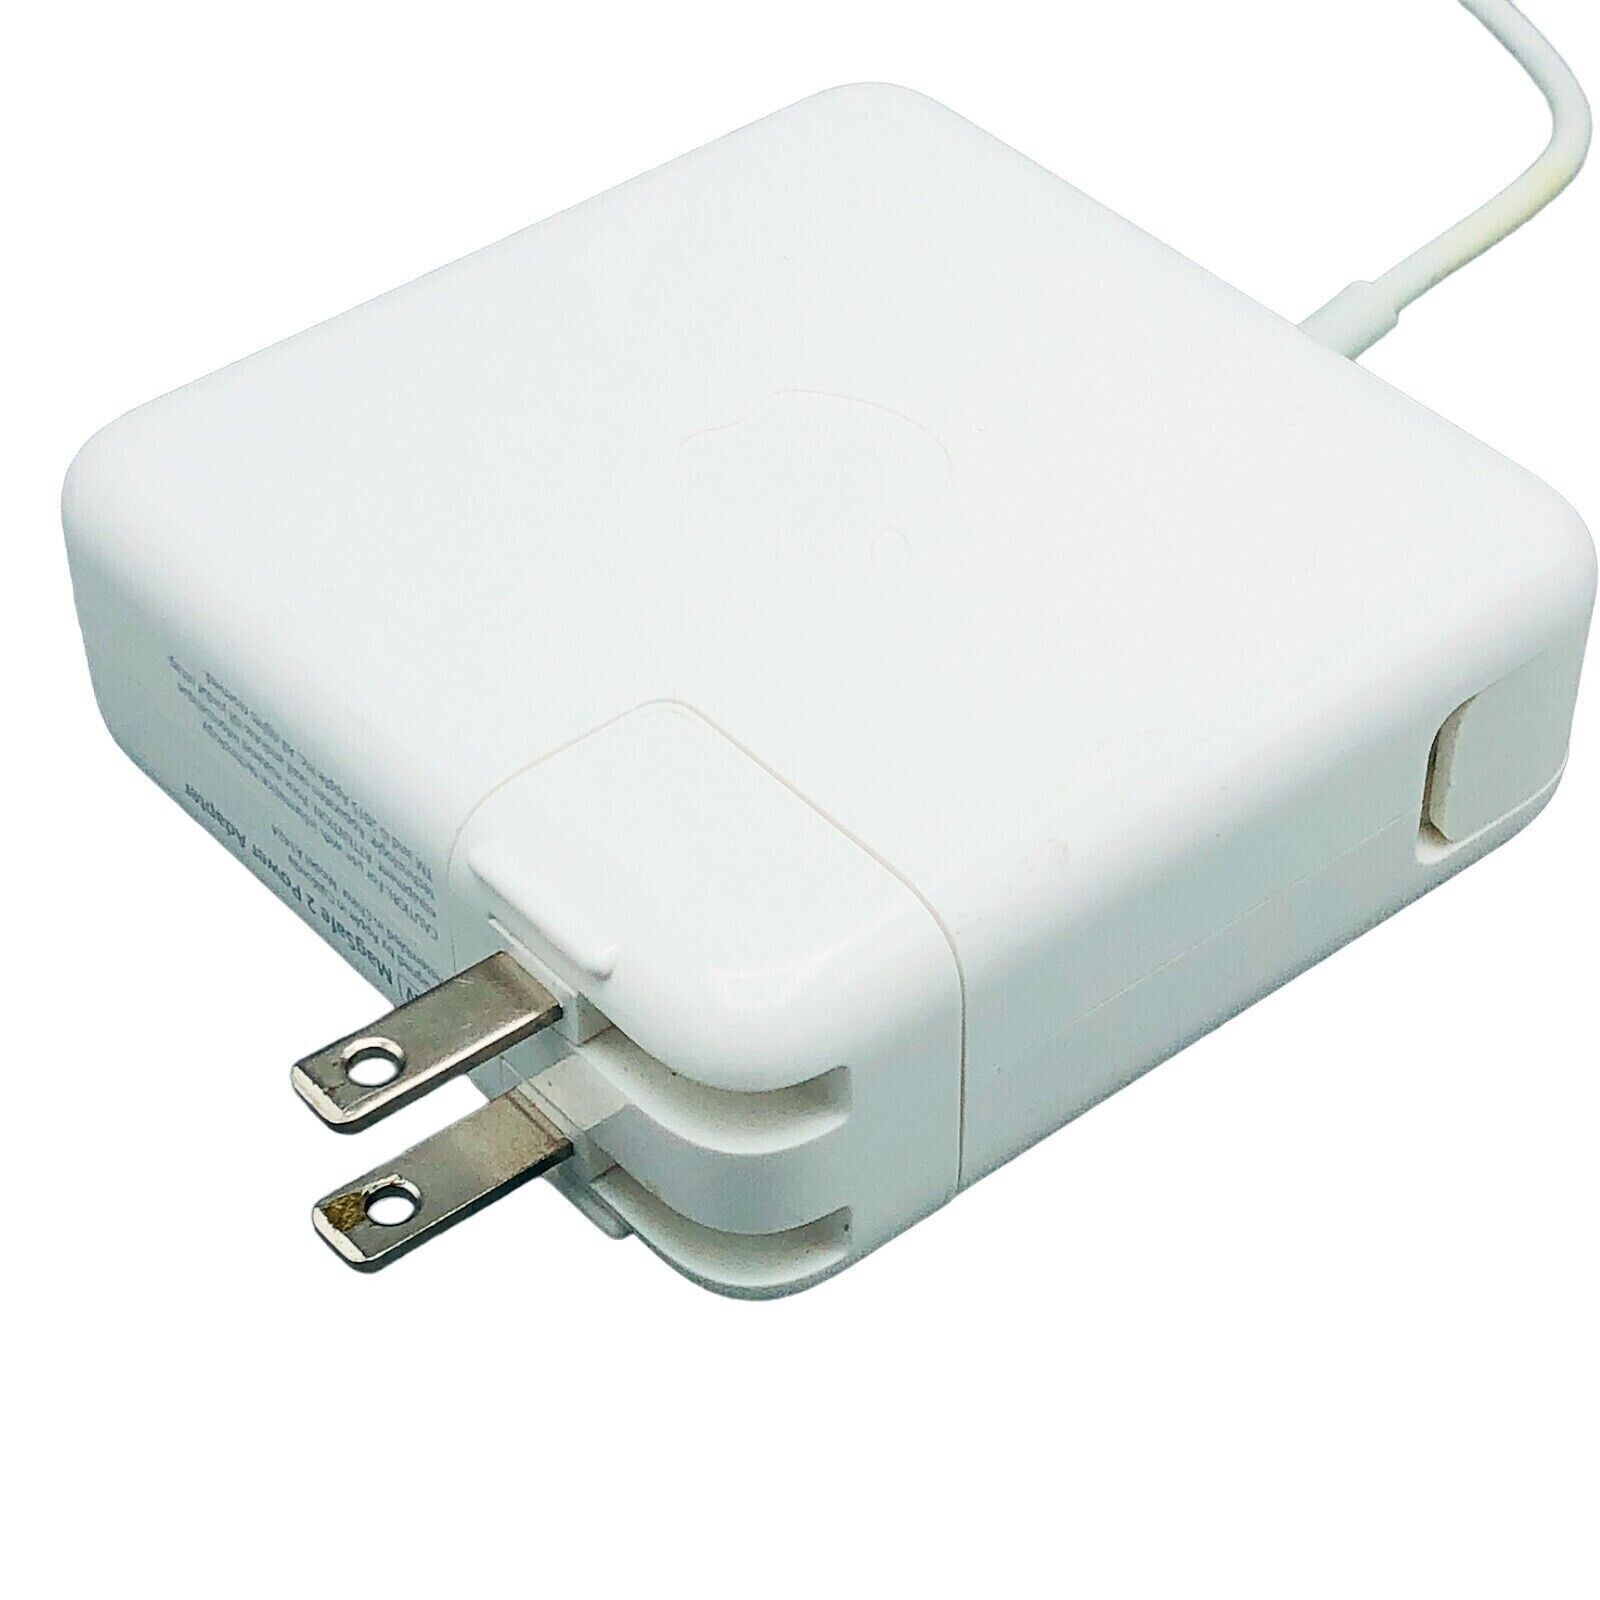 Genuine Authentic Apple 45W Magsafe 2 Charger for MacBook Air 13 11 A1465 2012+